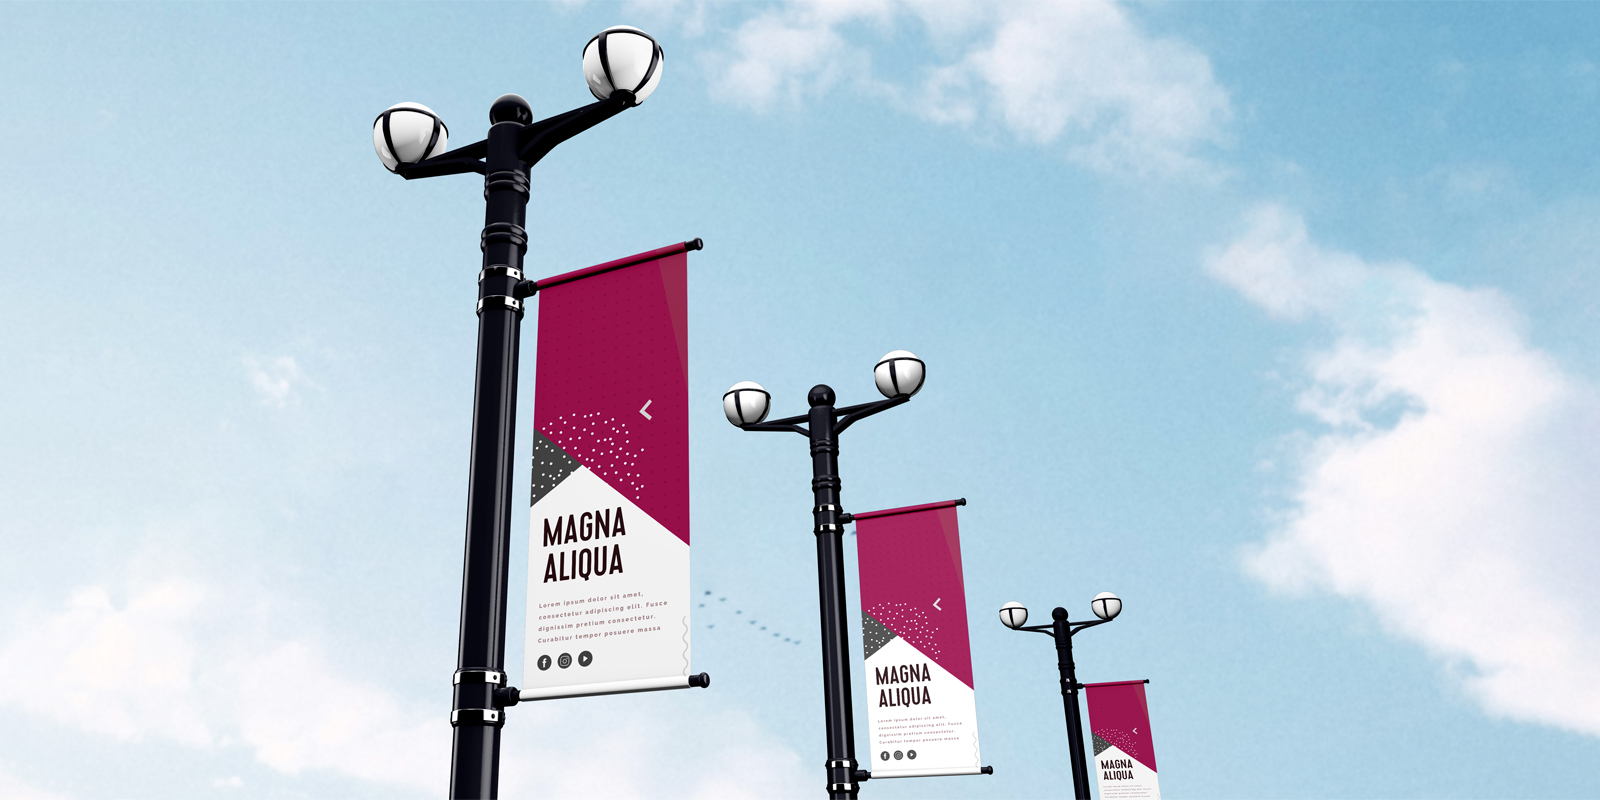 Pole banners in Rockingham - Print with Pagerr